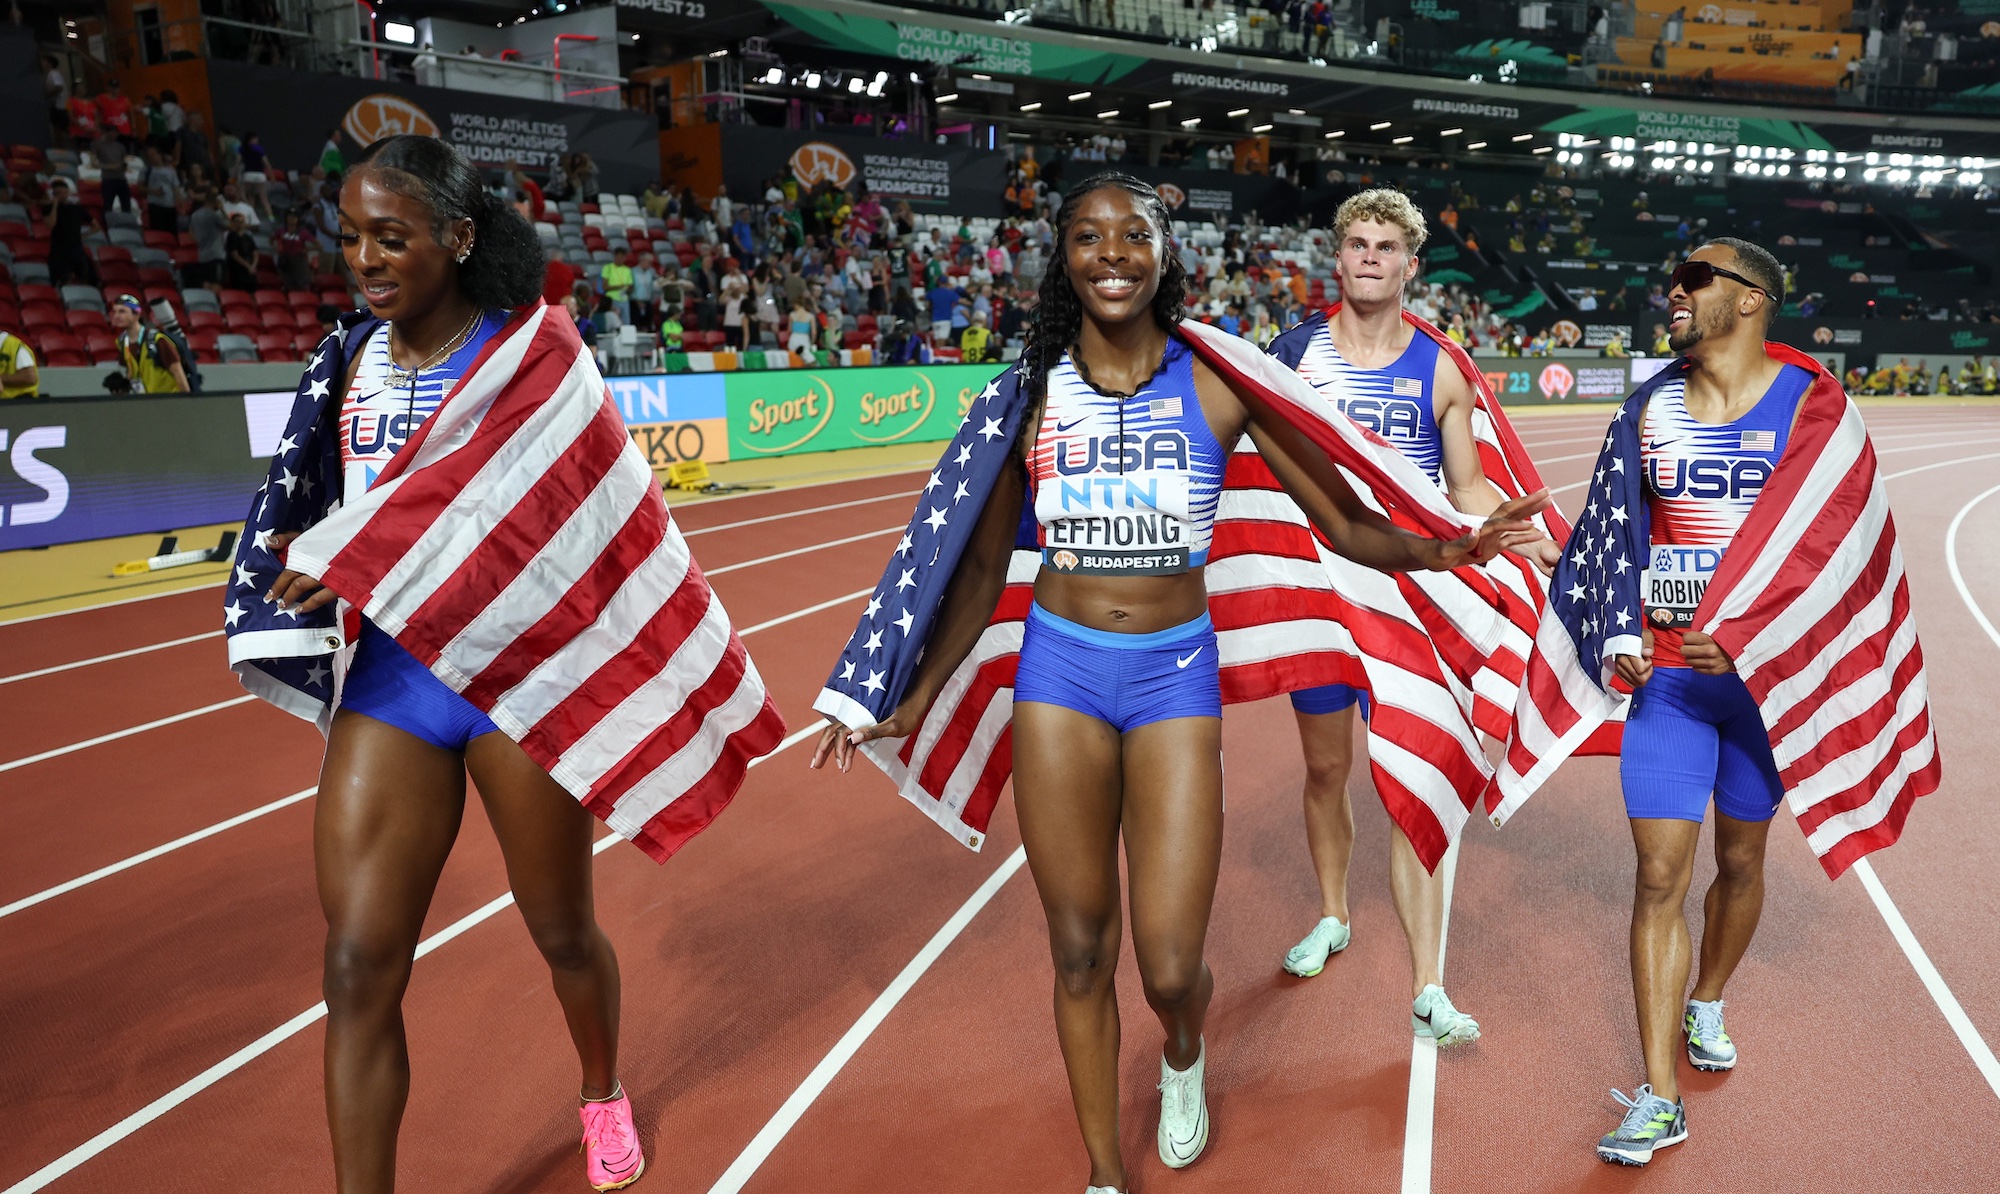 At the Budapest 23 World Athletics Championships, Team United States 🇺🇸 accomplished a remarkable victory in the mixed 4x400m relay 🏃‍♀️🏃‍♂️. They not only clinched gold 🥇, but also set a fresh world record of 3:08.80 ⏱️, outdoing their own previous record